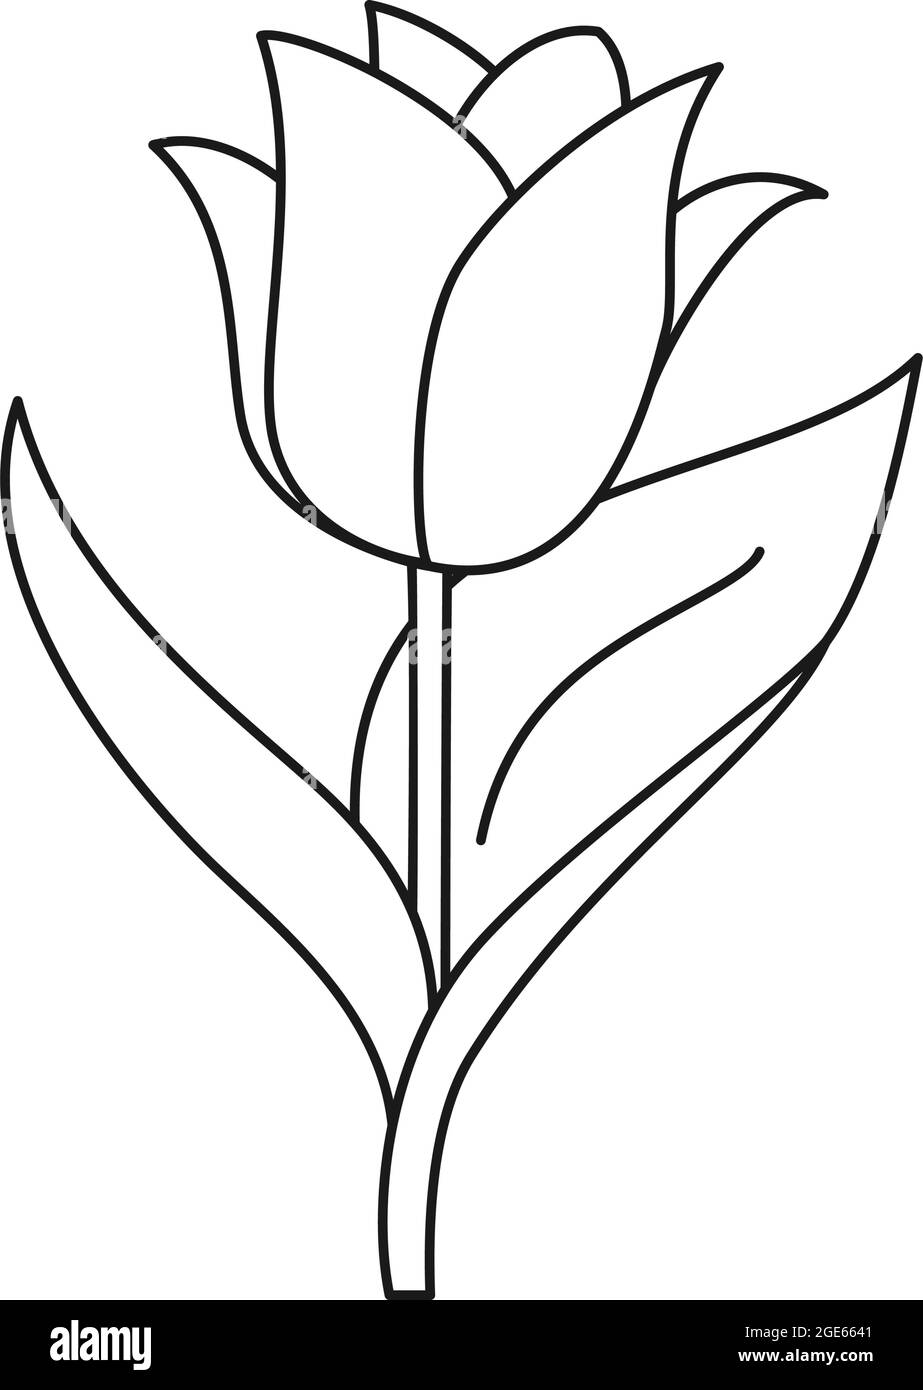 Black and white single tulip flower. Coloring book page for adults ...